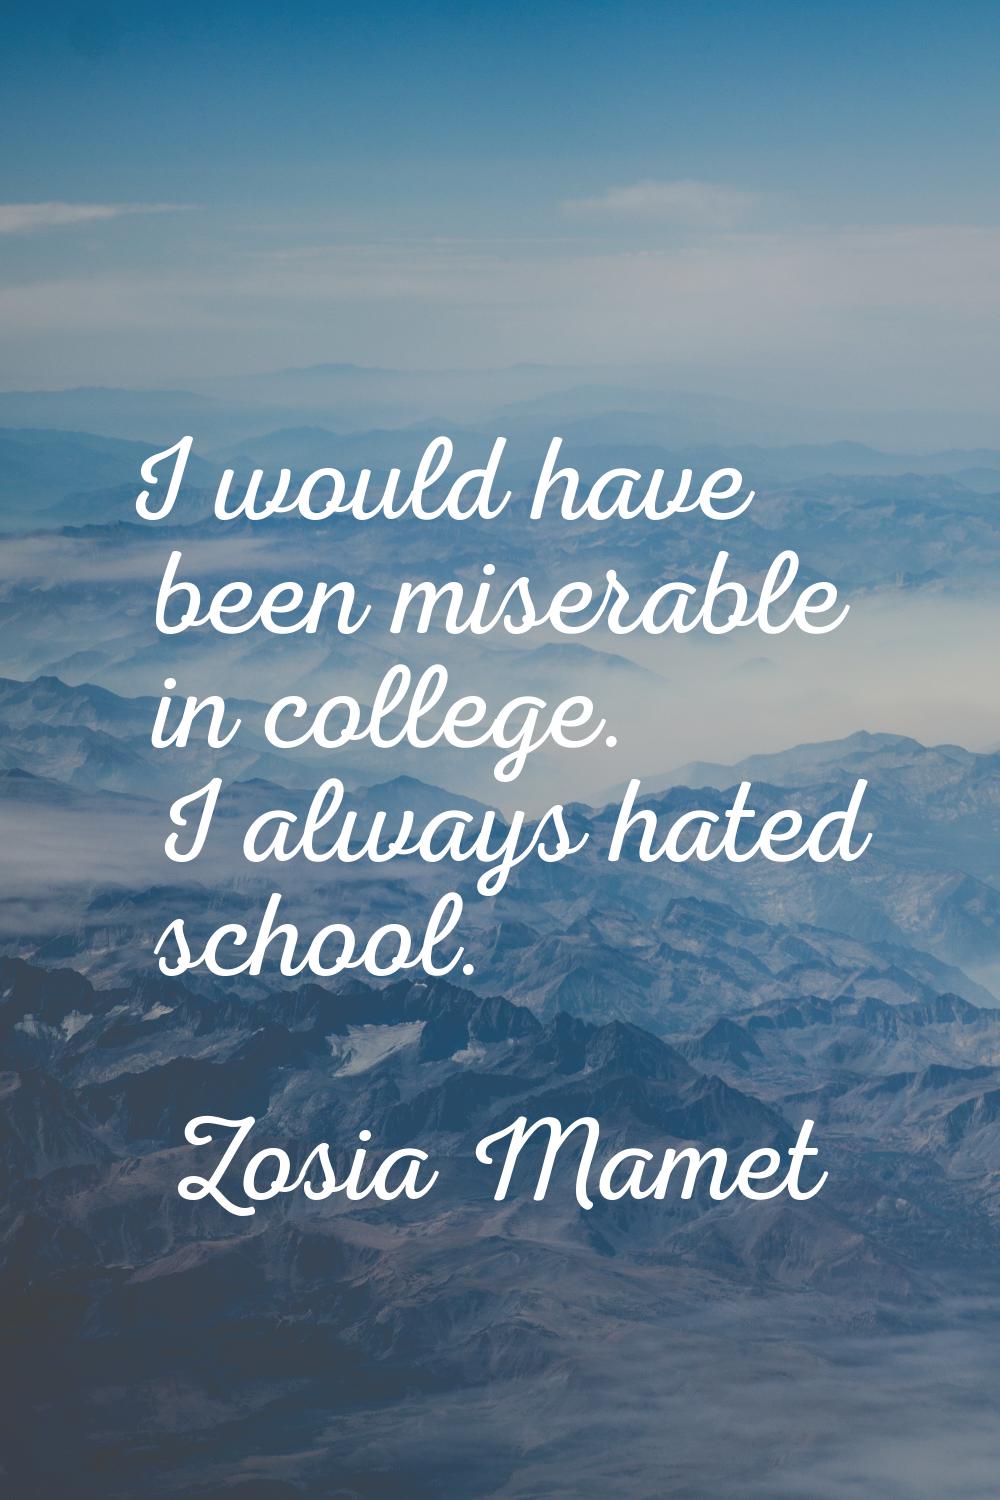 I would have been miserable in college. I always hated school.